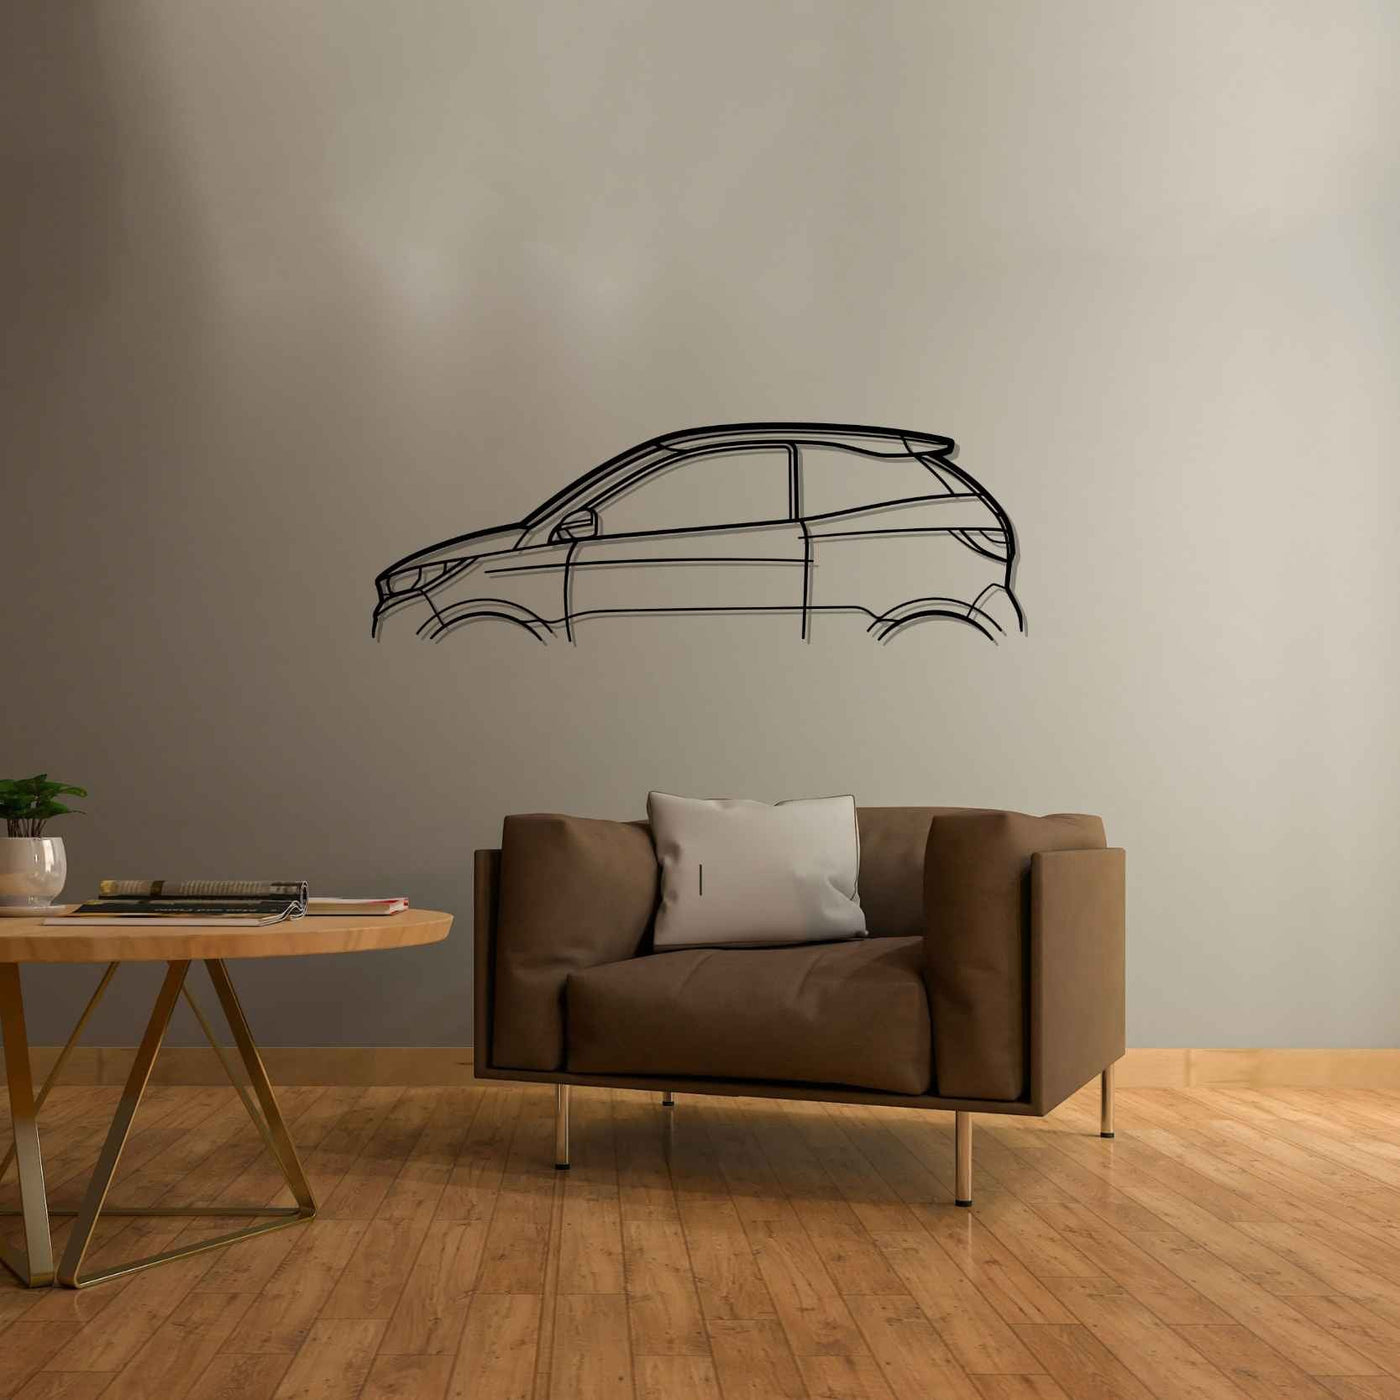 Aixam Coupe GTI Silhouette Metal Wall Art